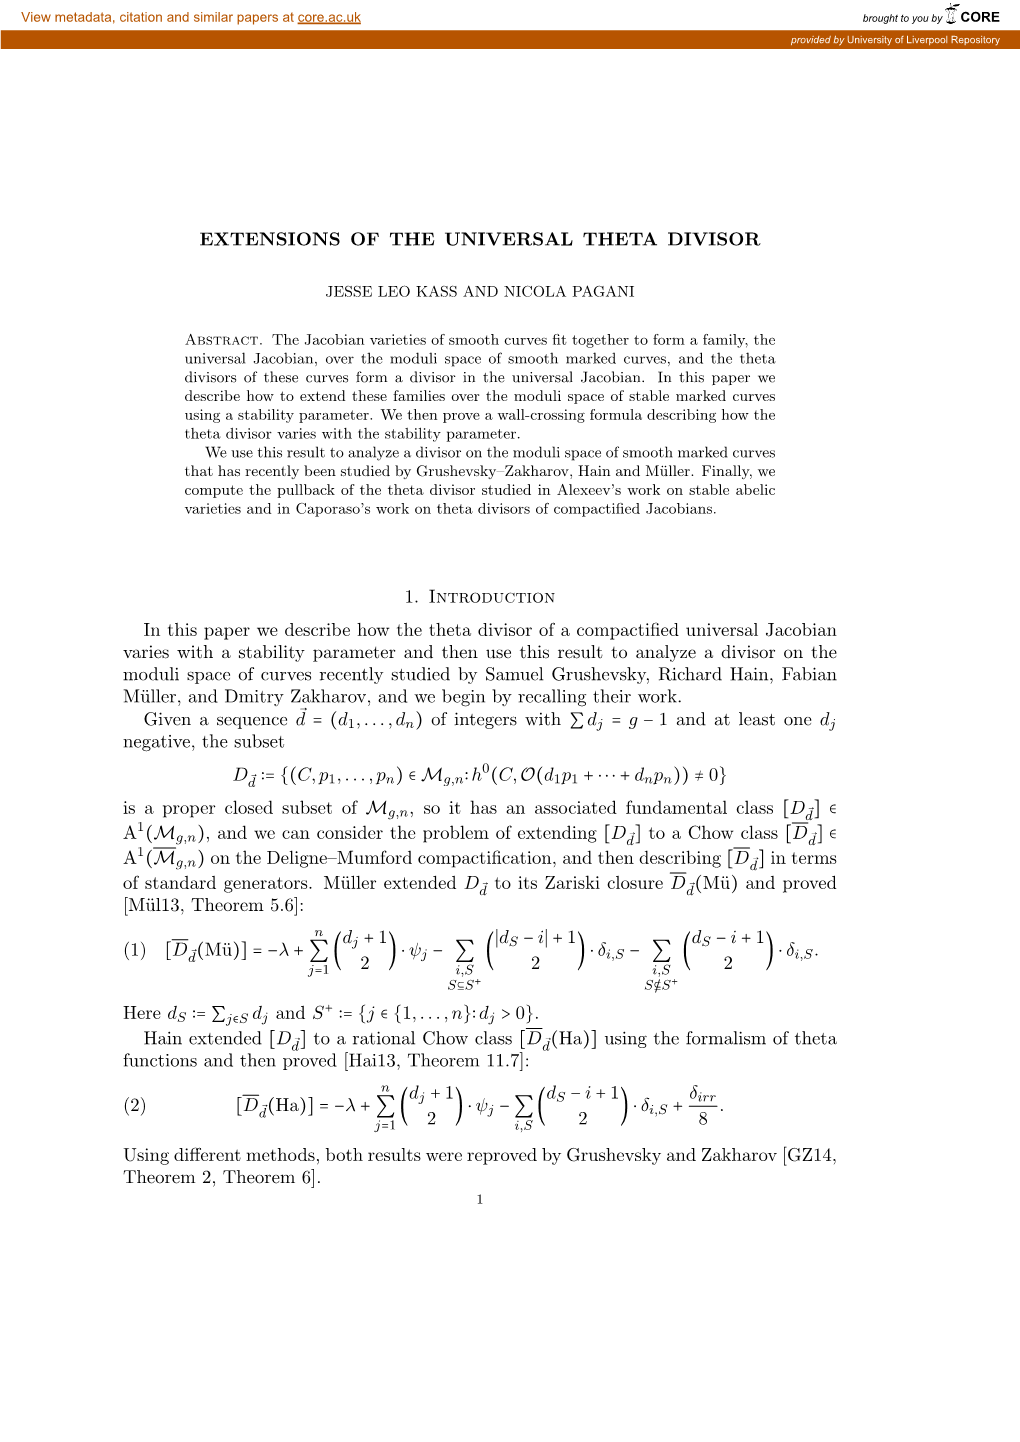 EXTENSIONS of the UNIVERSAL THETA DIVISOR 1. Introduction in This Paper We Describe How the Theta Divisor of a Compactified Univ